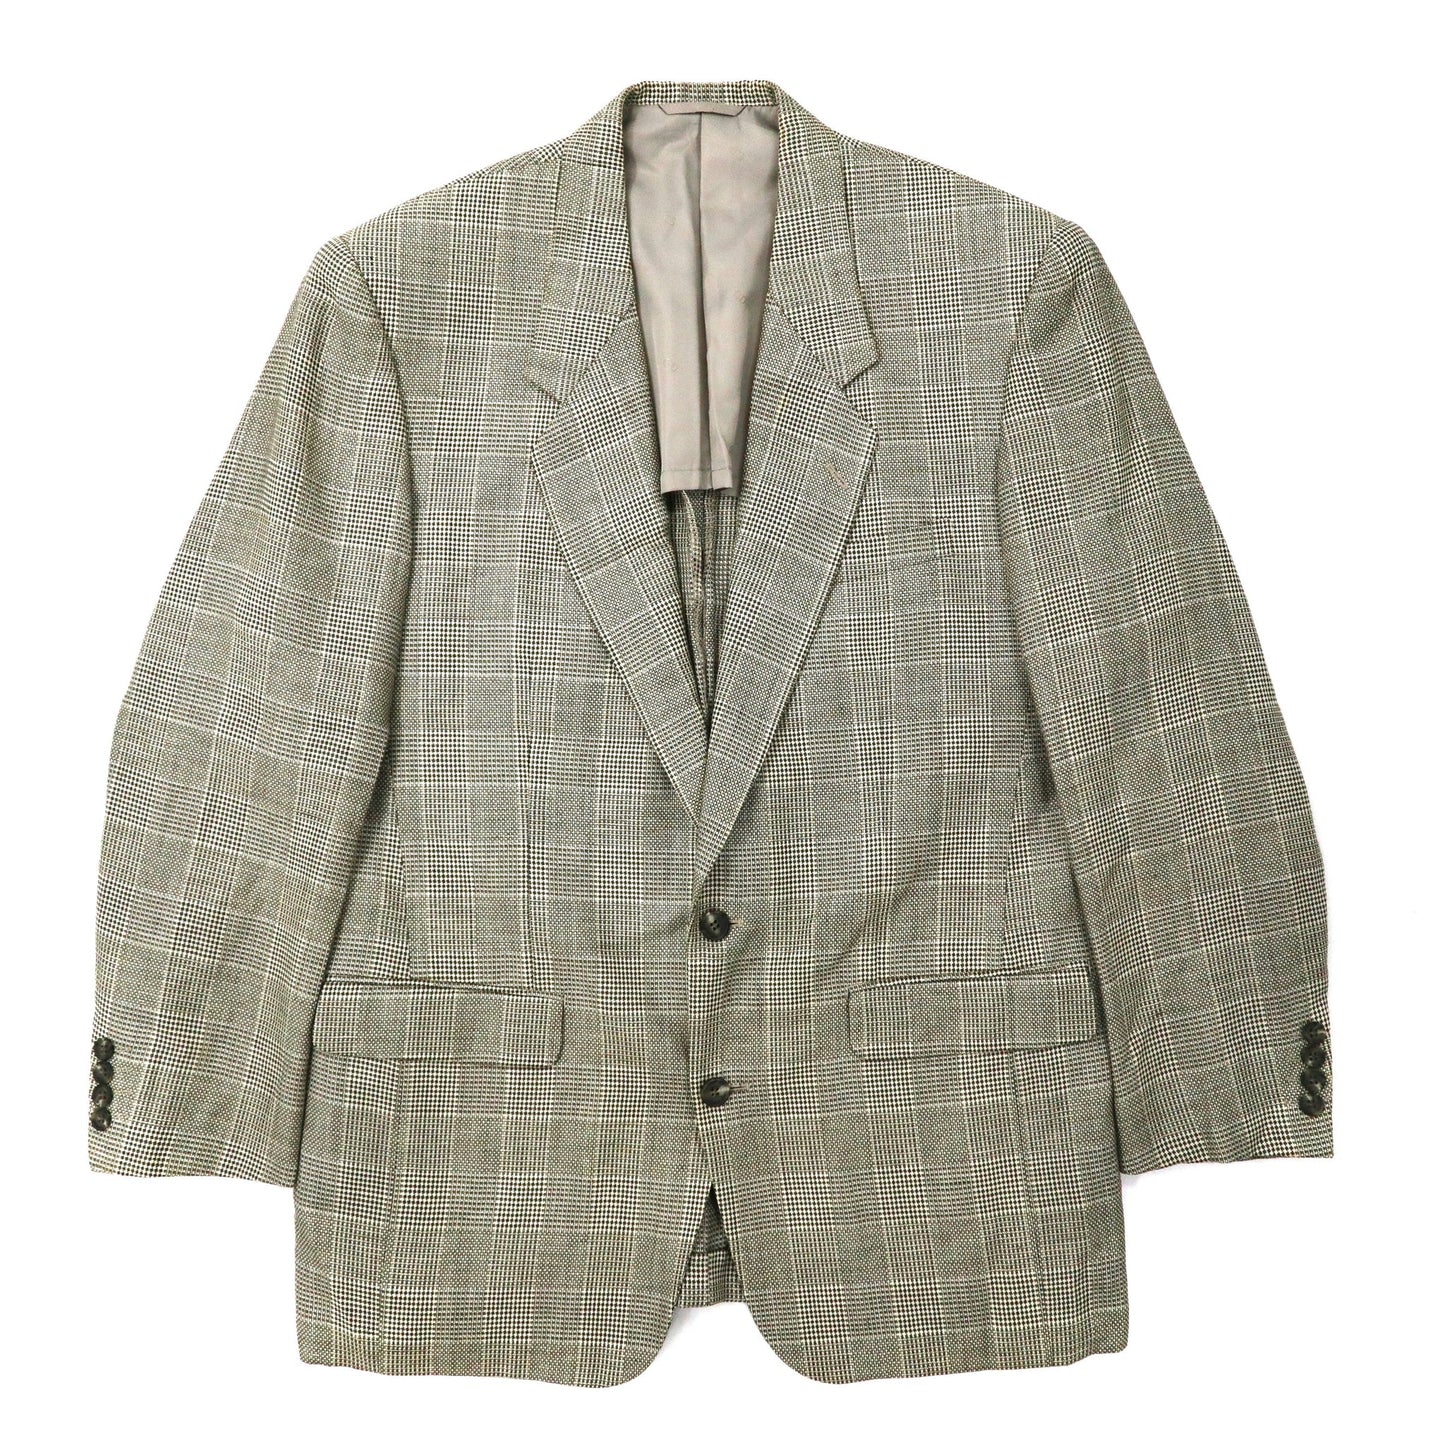 Christian Dior Monsieur 2B Tailored Jacket A-7 Gray CHECKED Wool